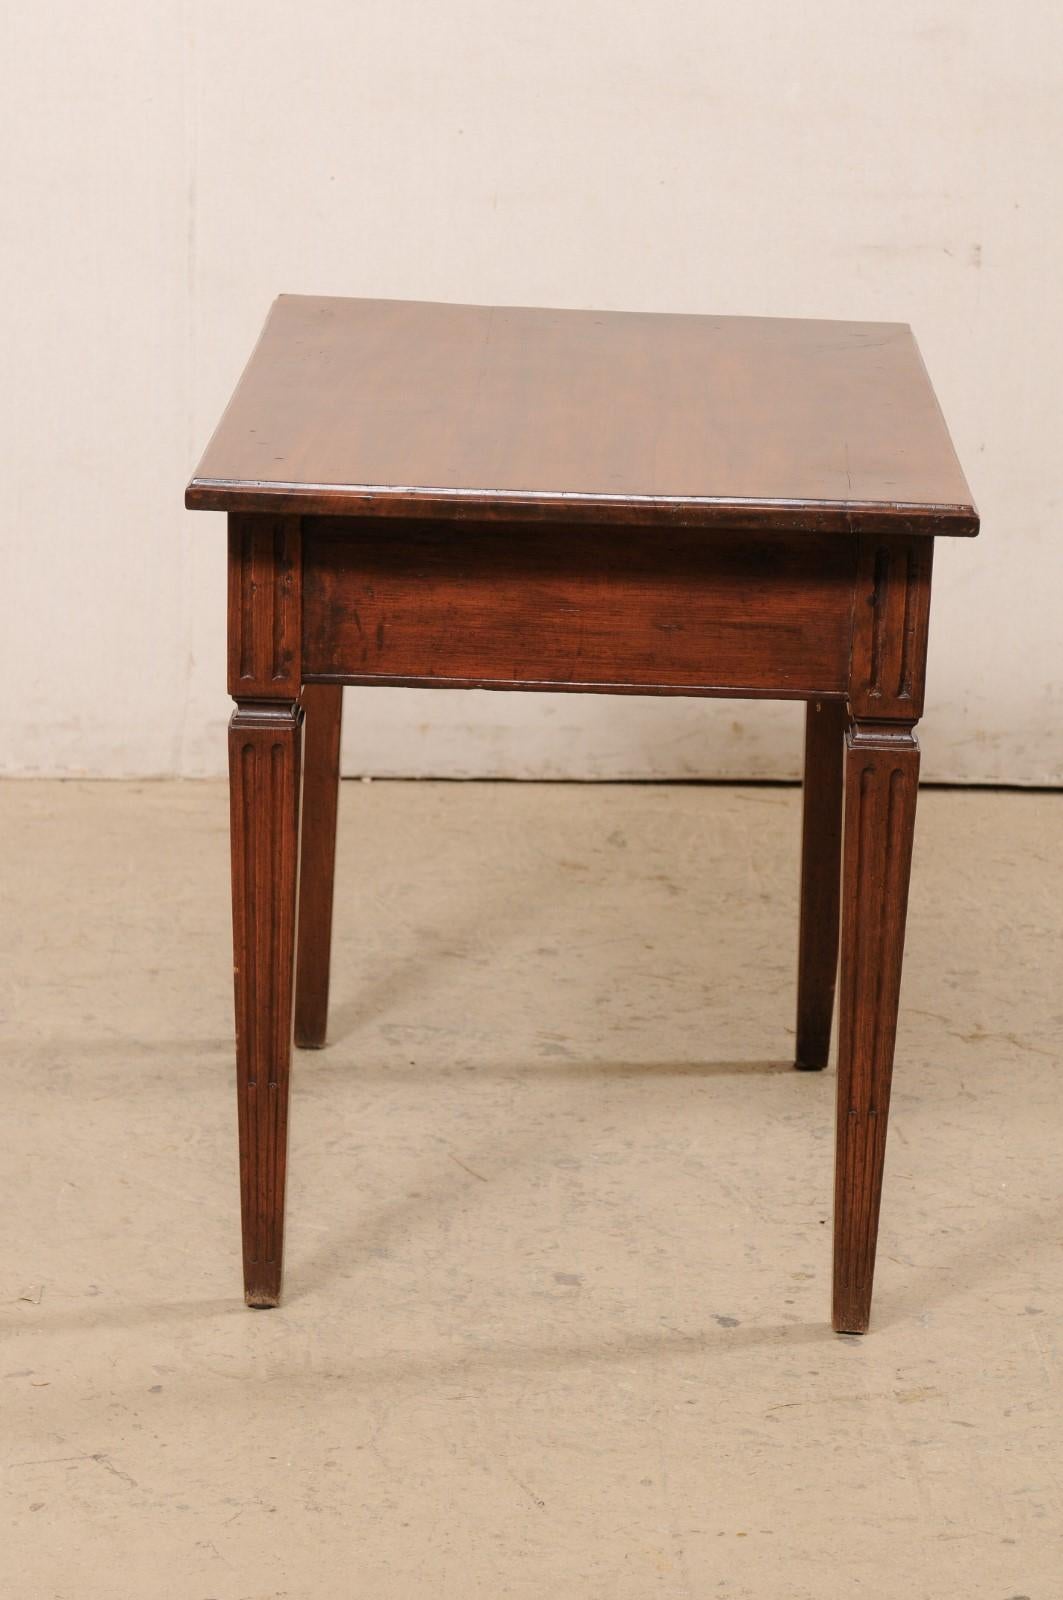 Italian Small Wooden Table w/Drawer Presented on Flute-Carved Legs, 19th C. For Sale 4